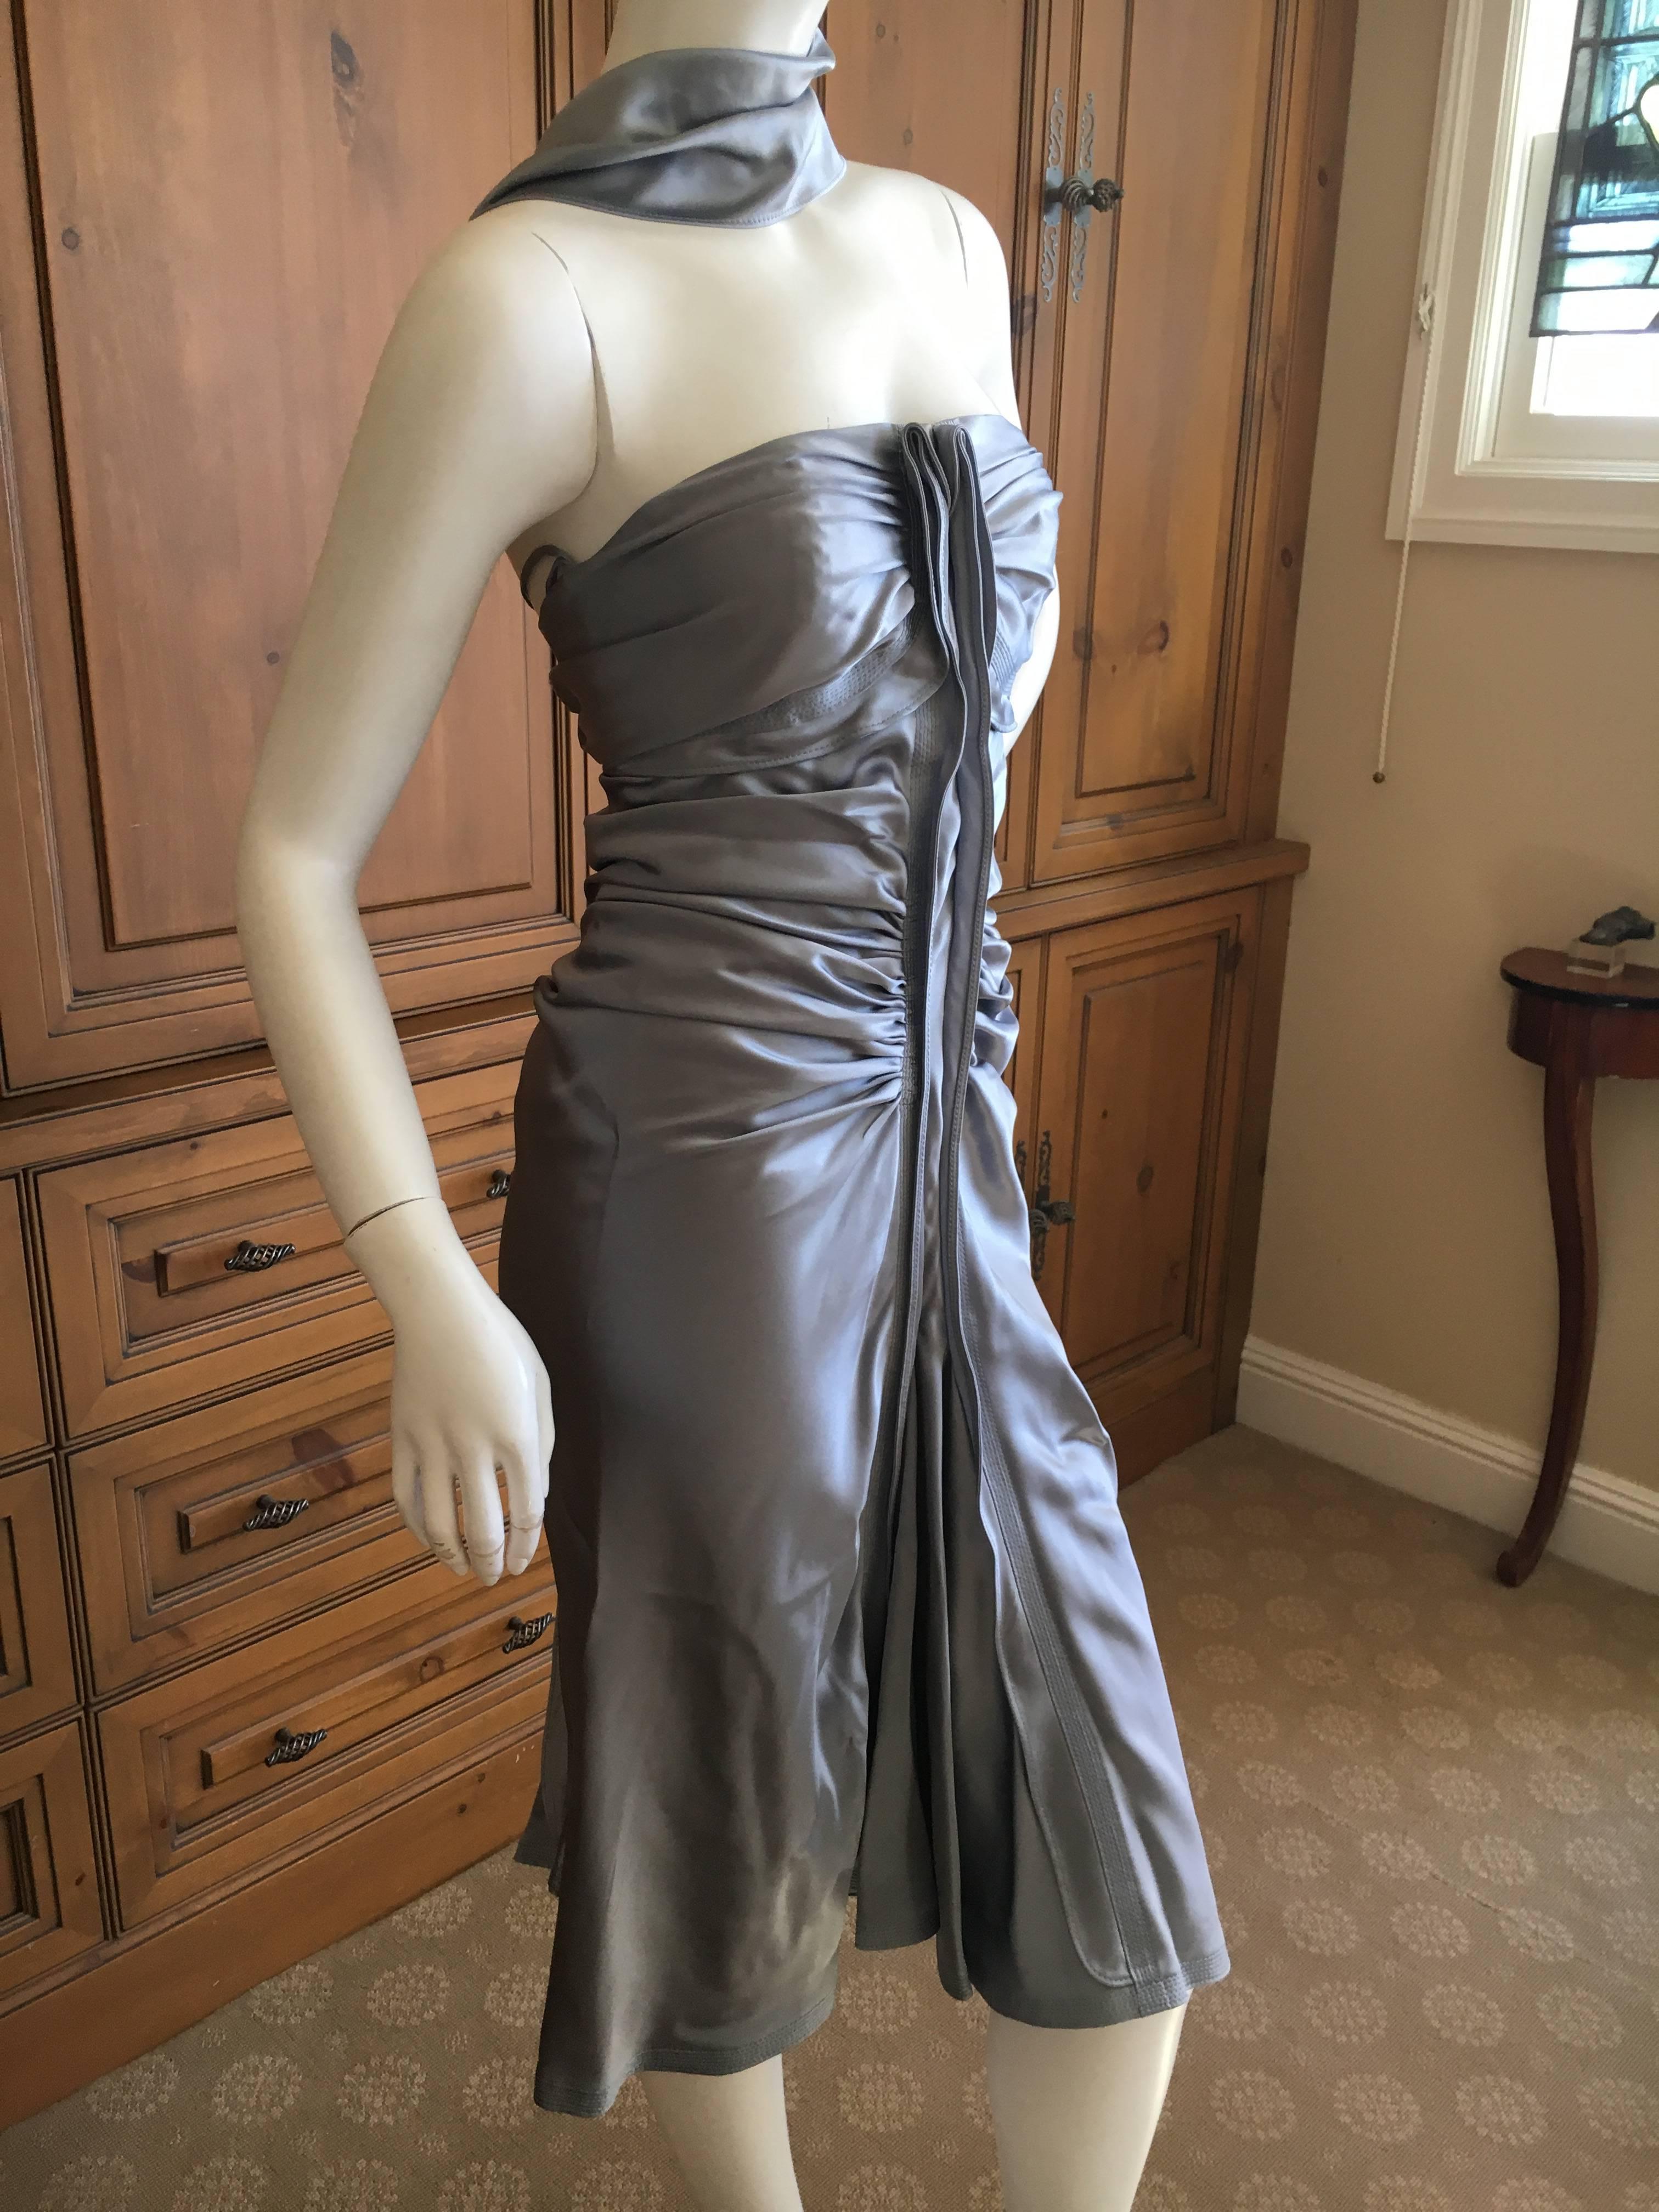 Yves Saint Laurent by Tom Ford Shimmery Silver Silk Dress

Measurements:
Bust 35â
Waist 28 â
Hips 38" 
Length 46â